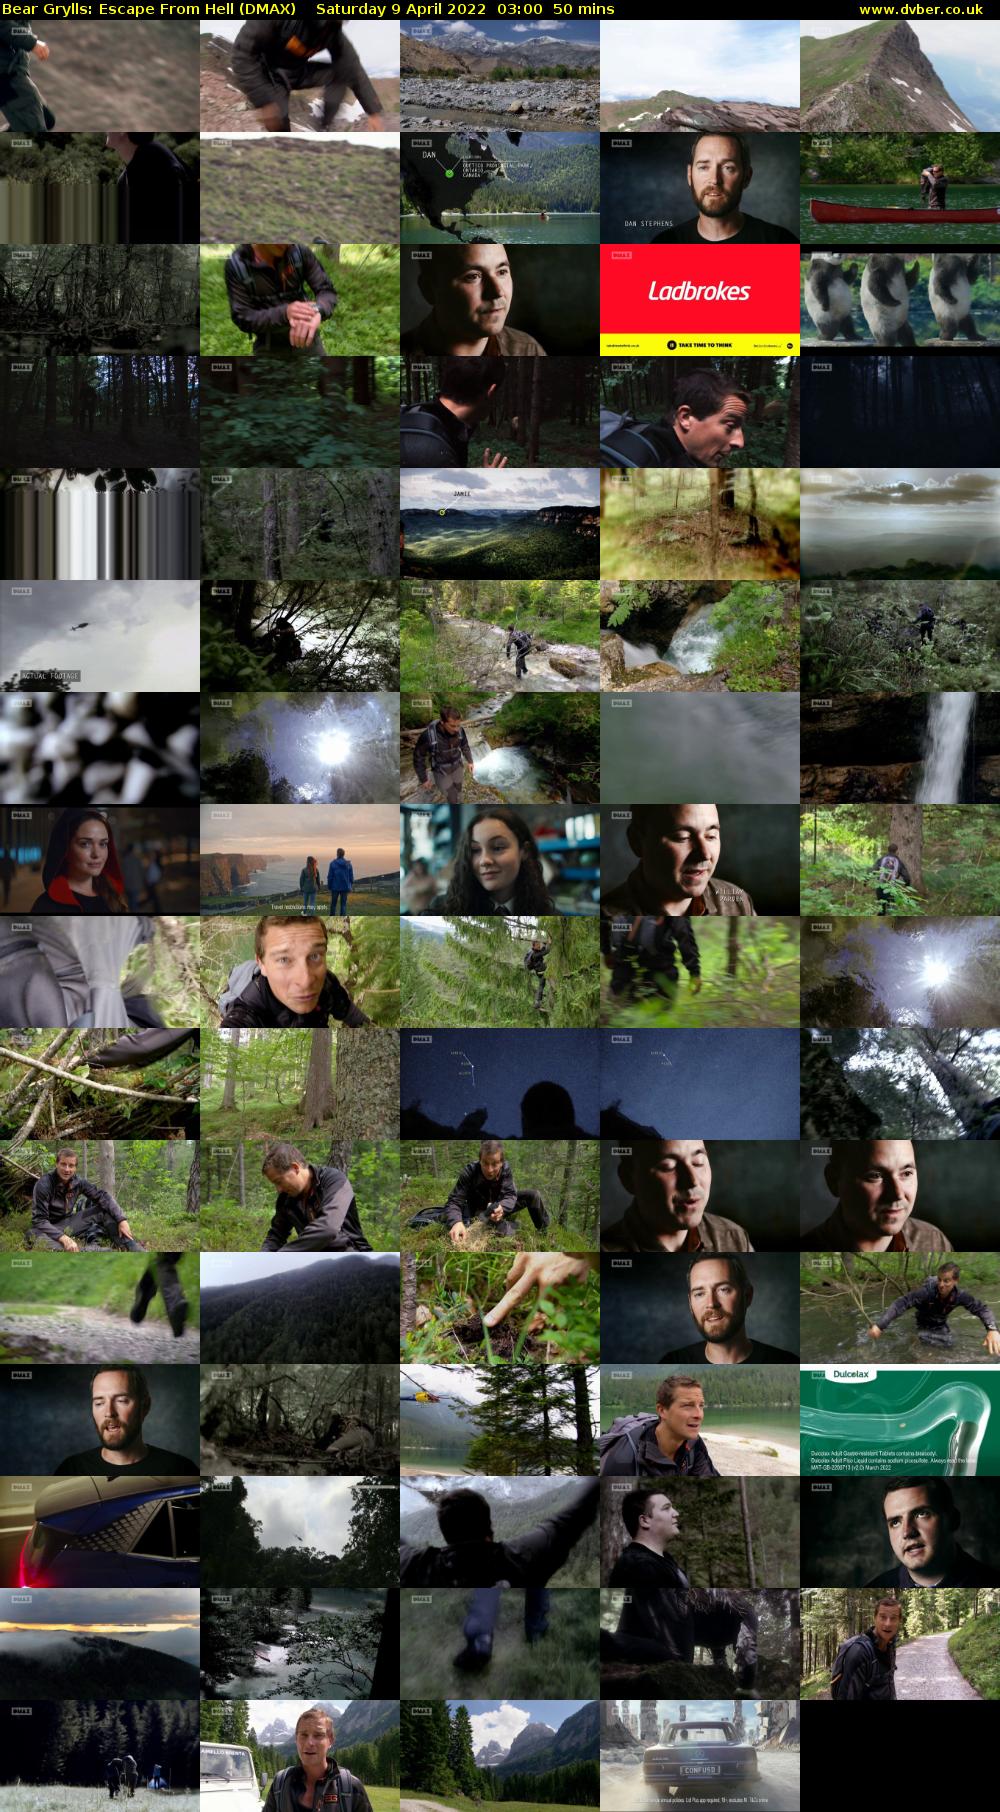 Bear Grylls: Escape From Hell (DMAX) Saturday 9 April 2022 03:00 - 03:50